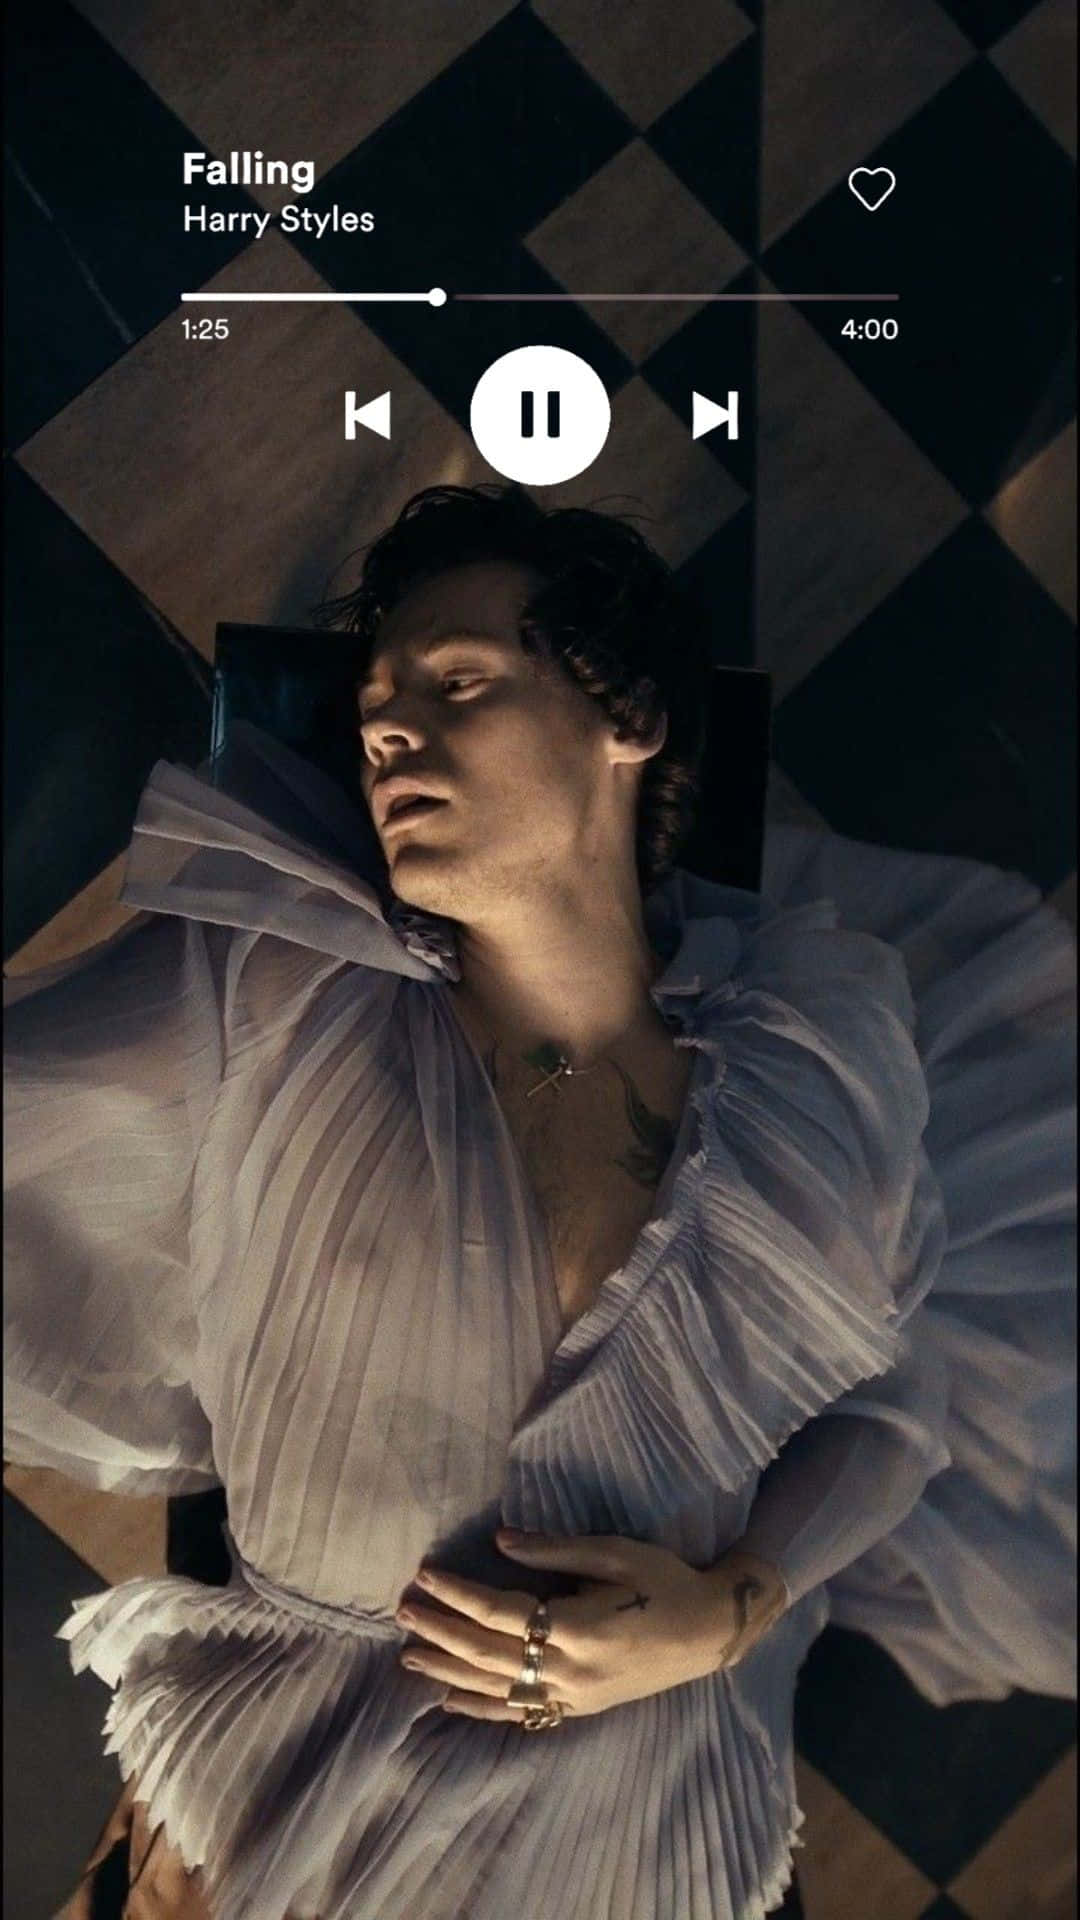 Falling From Harry Styles Album Cover Wallpaper